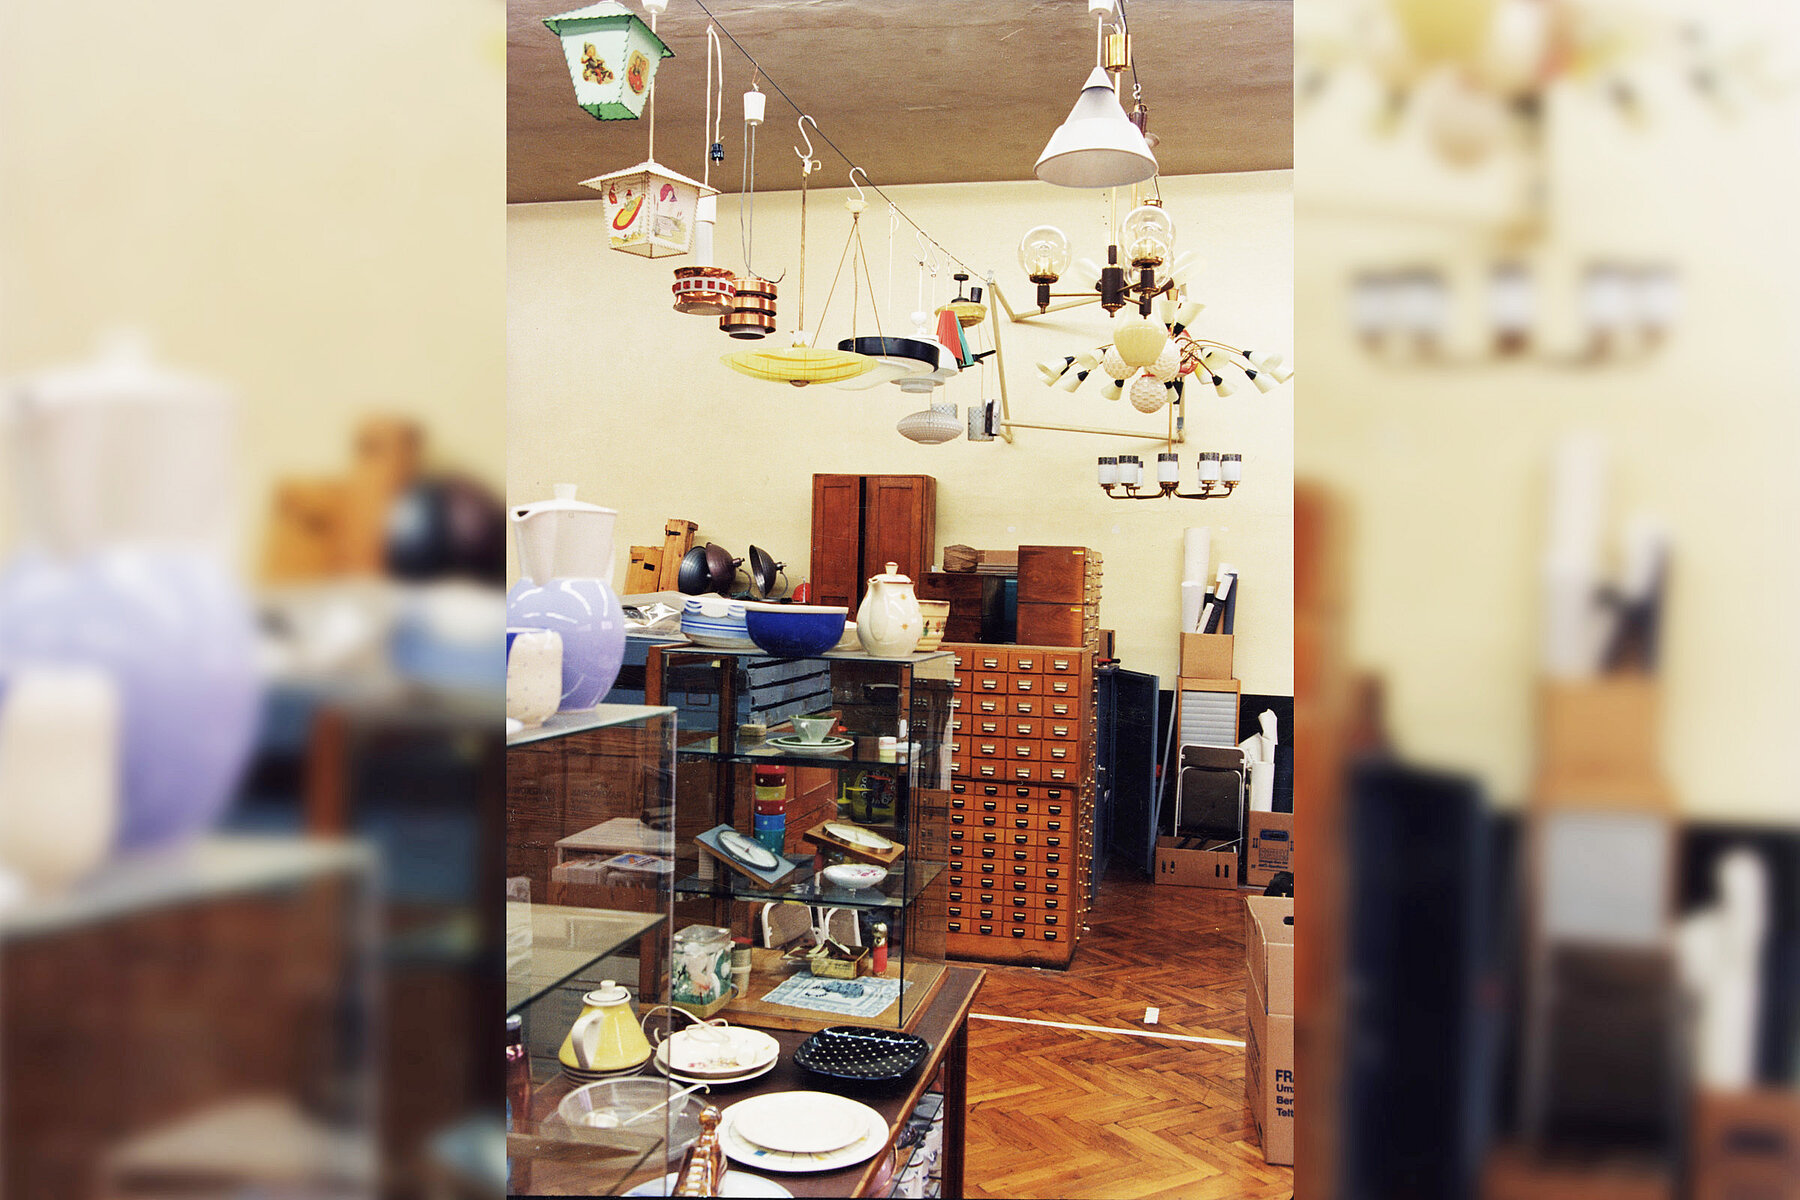 Temporary depot of the industrial design collection. Various objects of the design collection, such as lamps, plates and cupboards are located in one room.